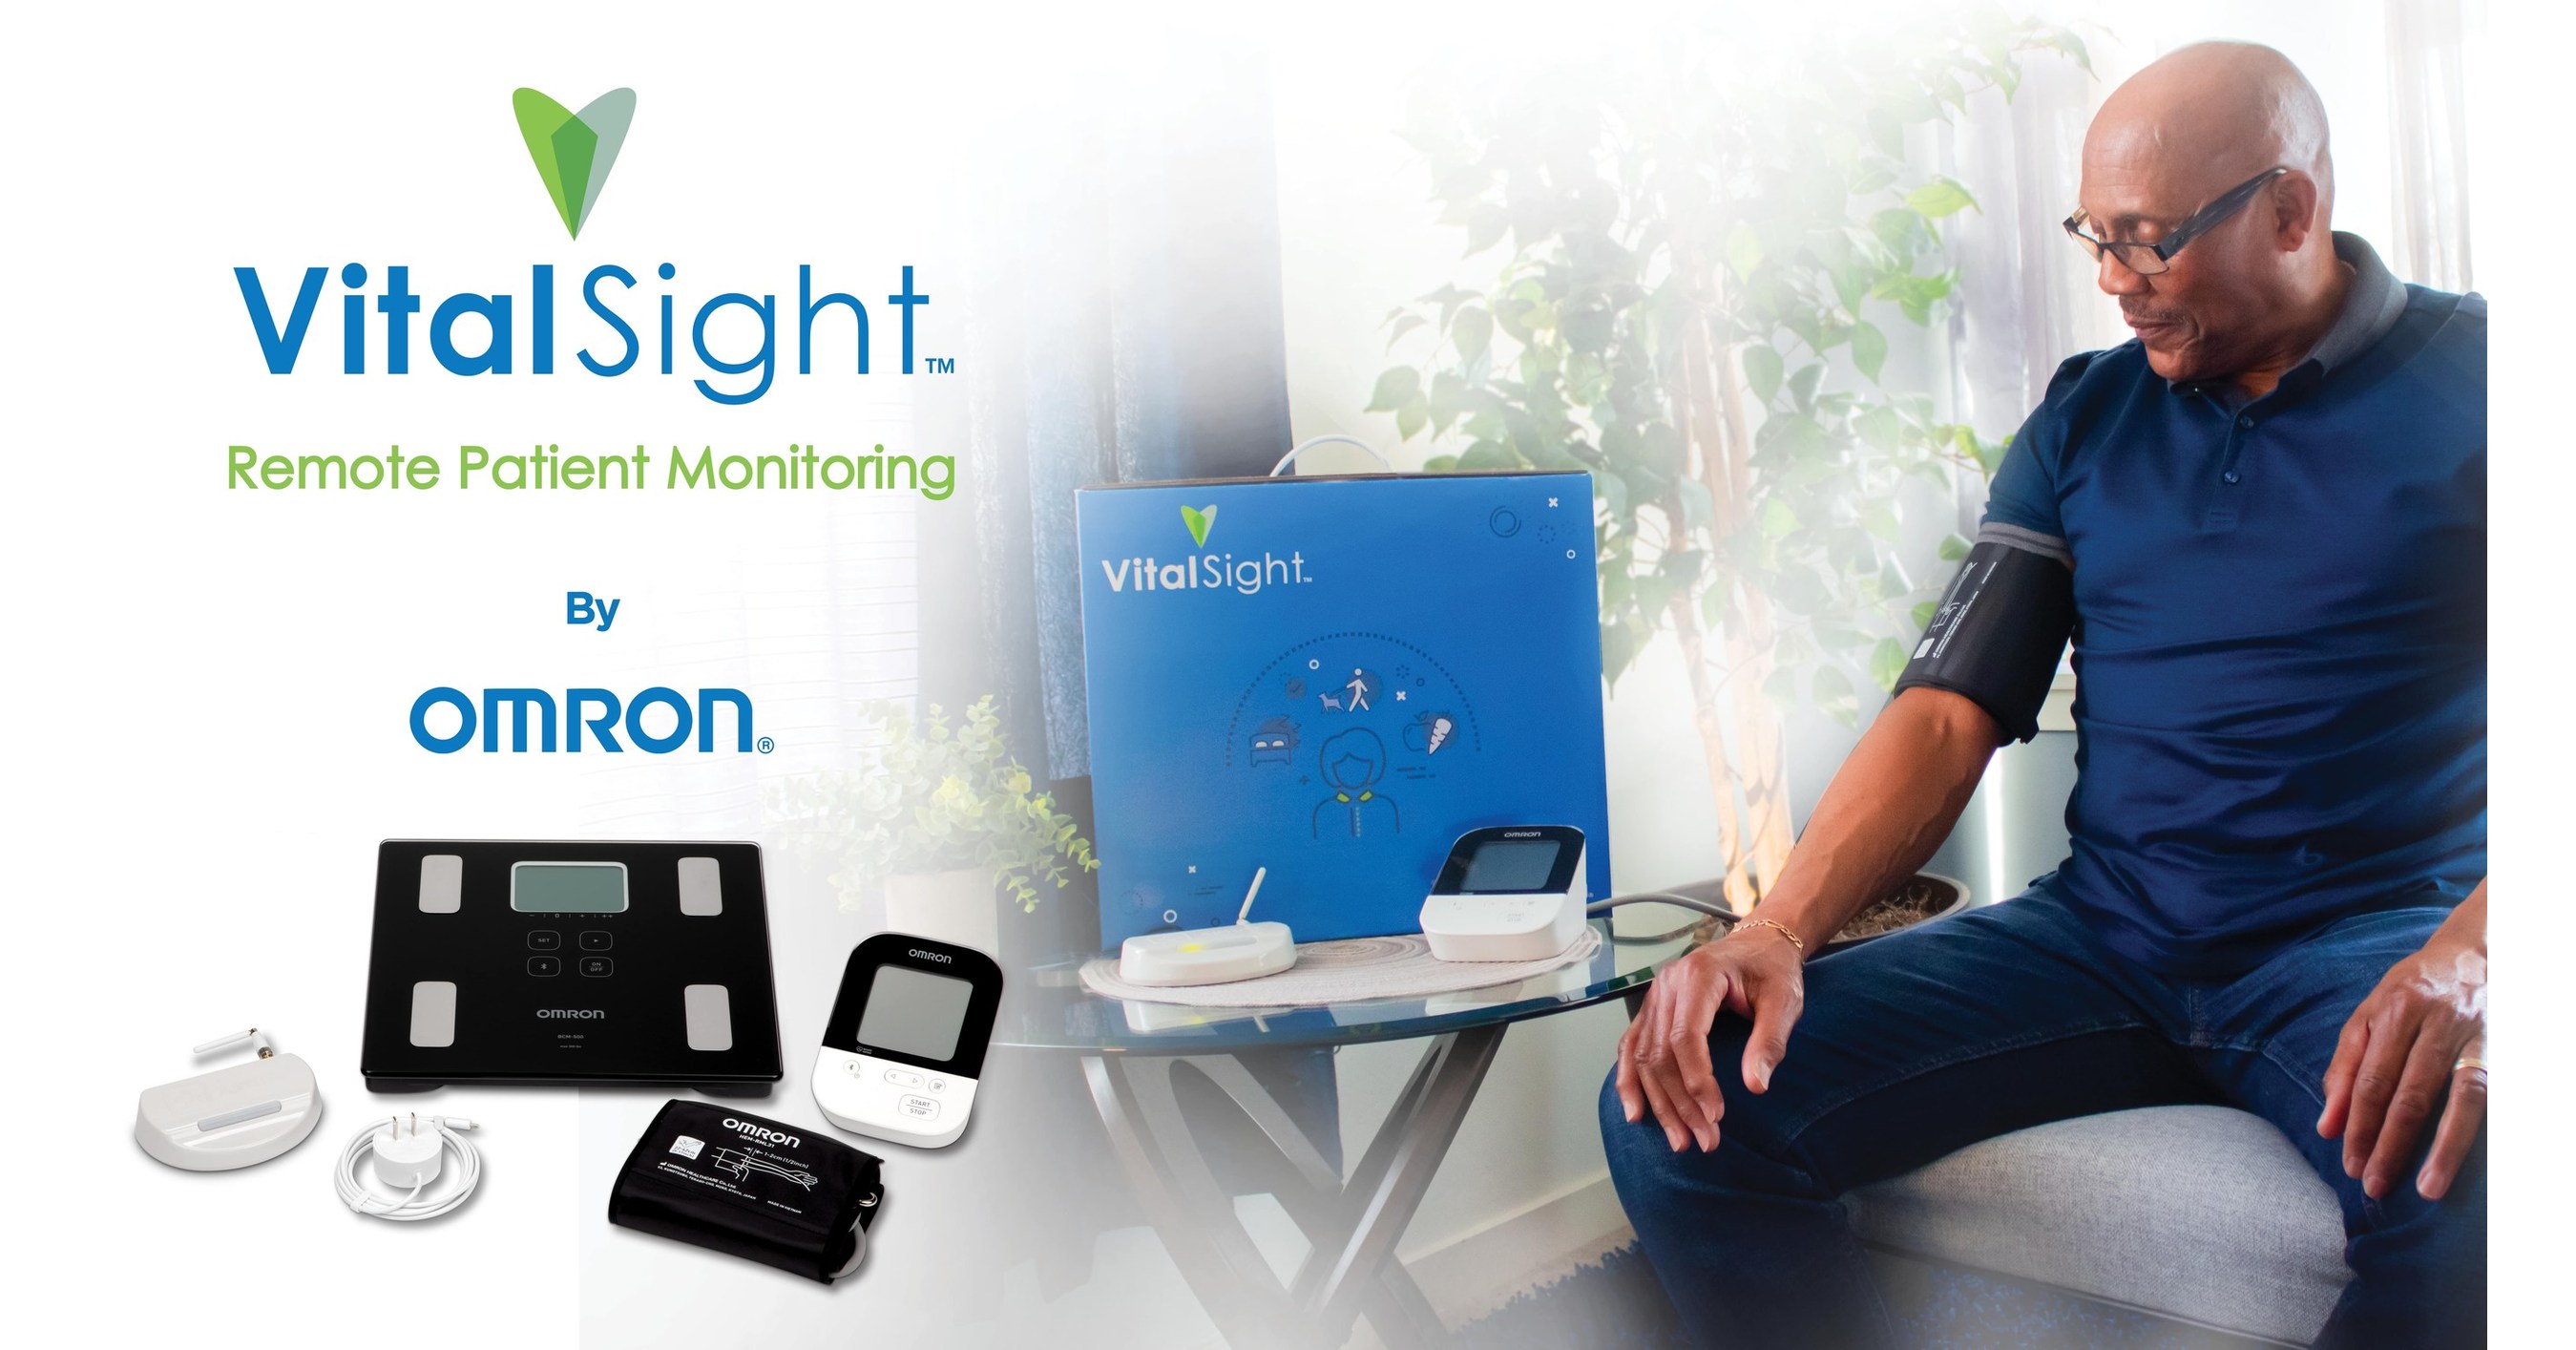 Omron's VitalSight is a blood pressure cuff that directly connects